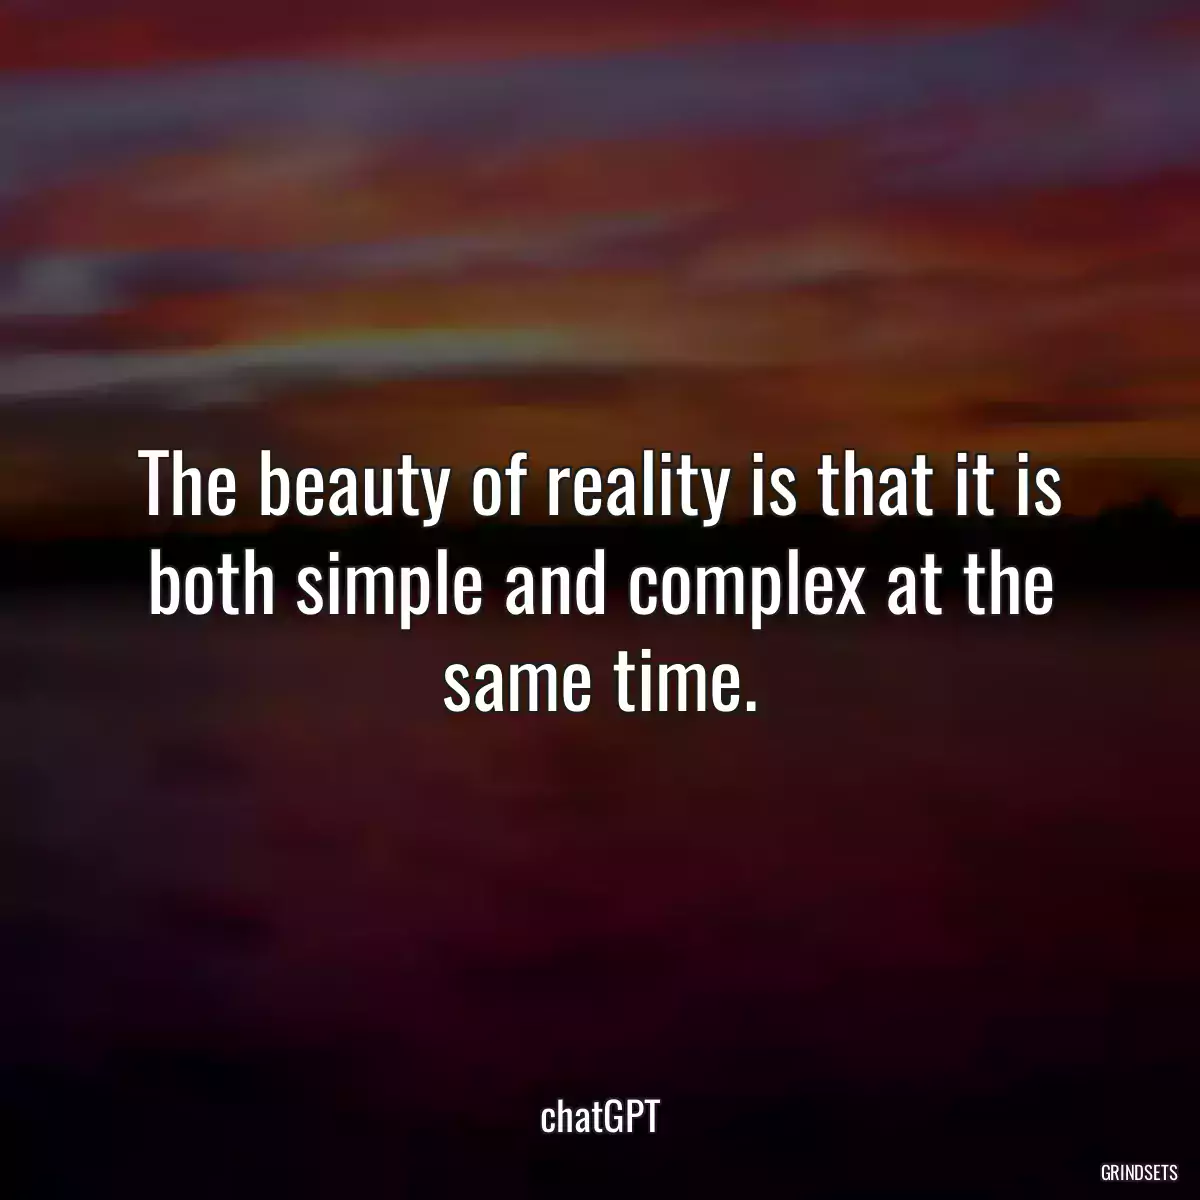 The beauty of reality is that it is both simple and complex at the same time.